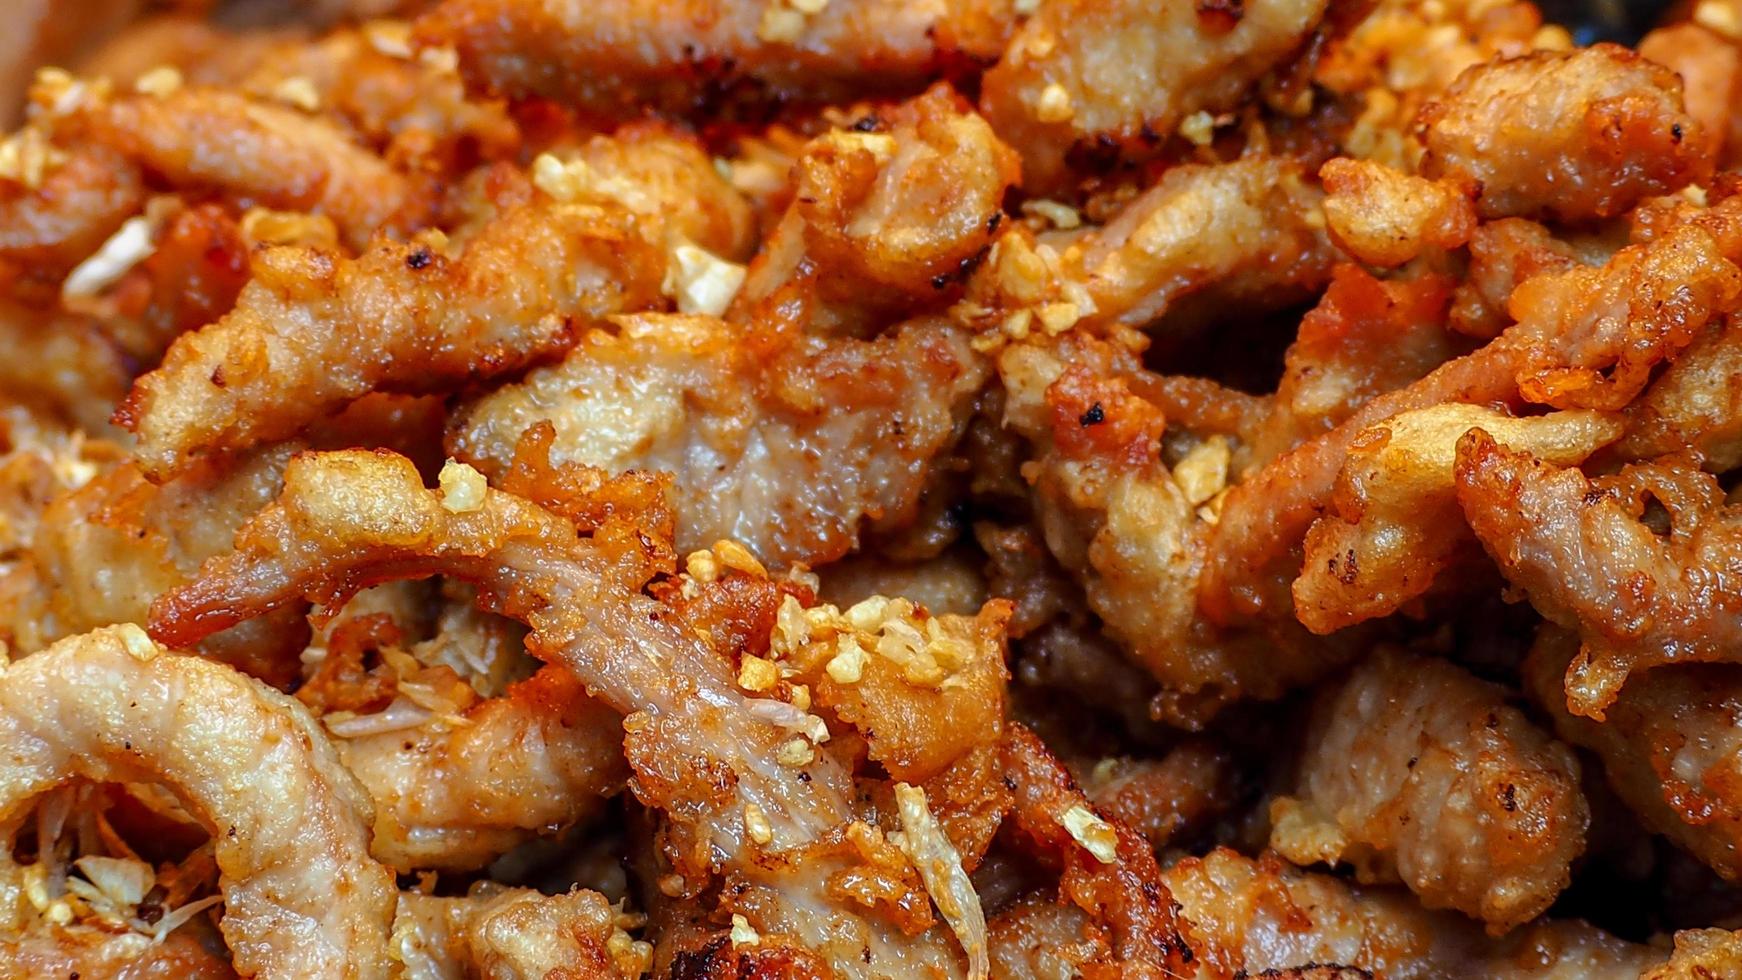 Fried pork with garlic fried. Asian food. Thai cuisine. Closeup dried chopped pork fried. Breakfast or lunch appetizer food in Thailand. Street food. Protein and fat source. Delicious recipes. photo